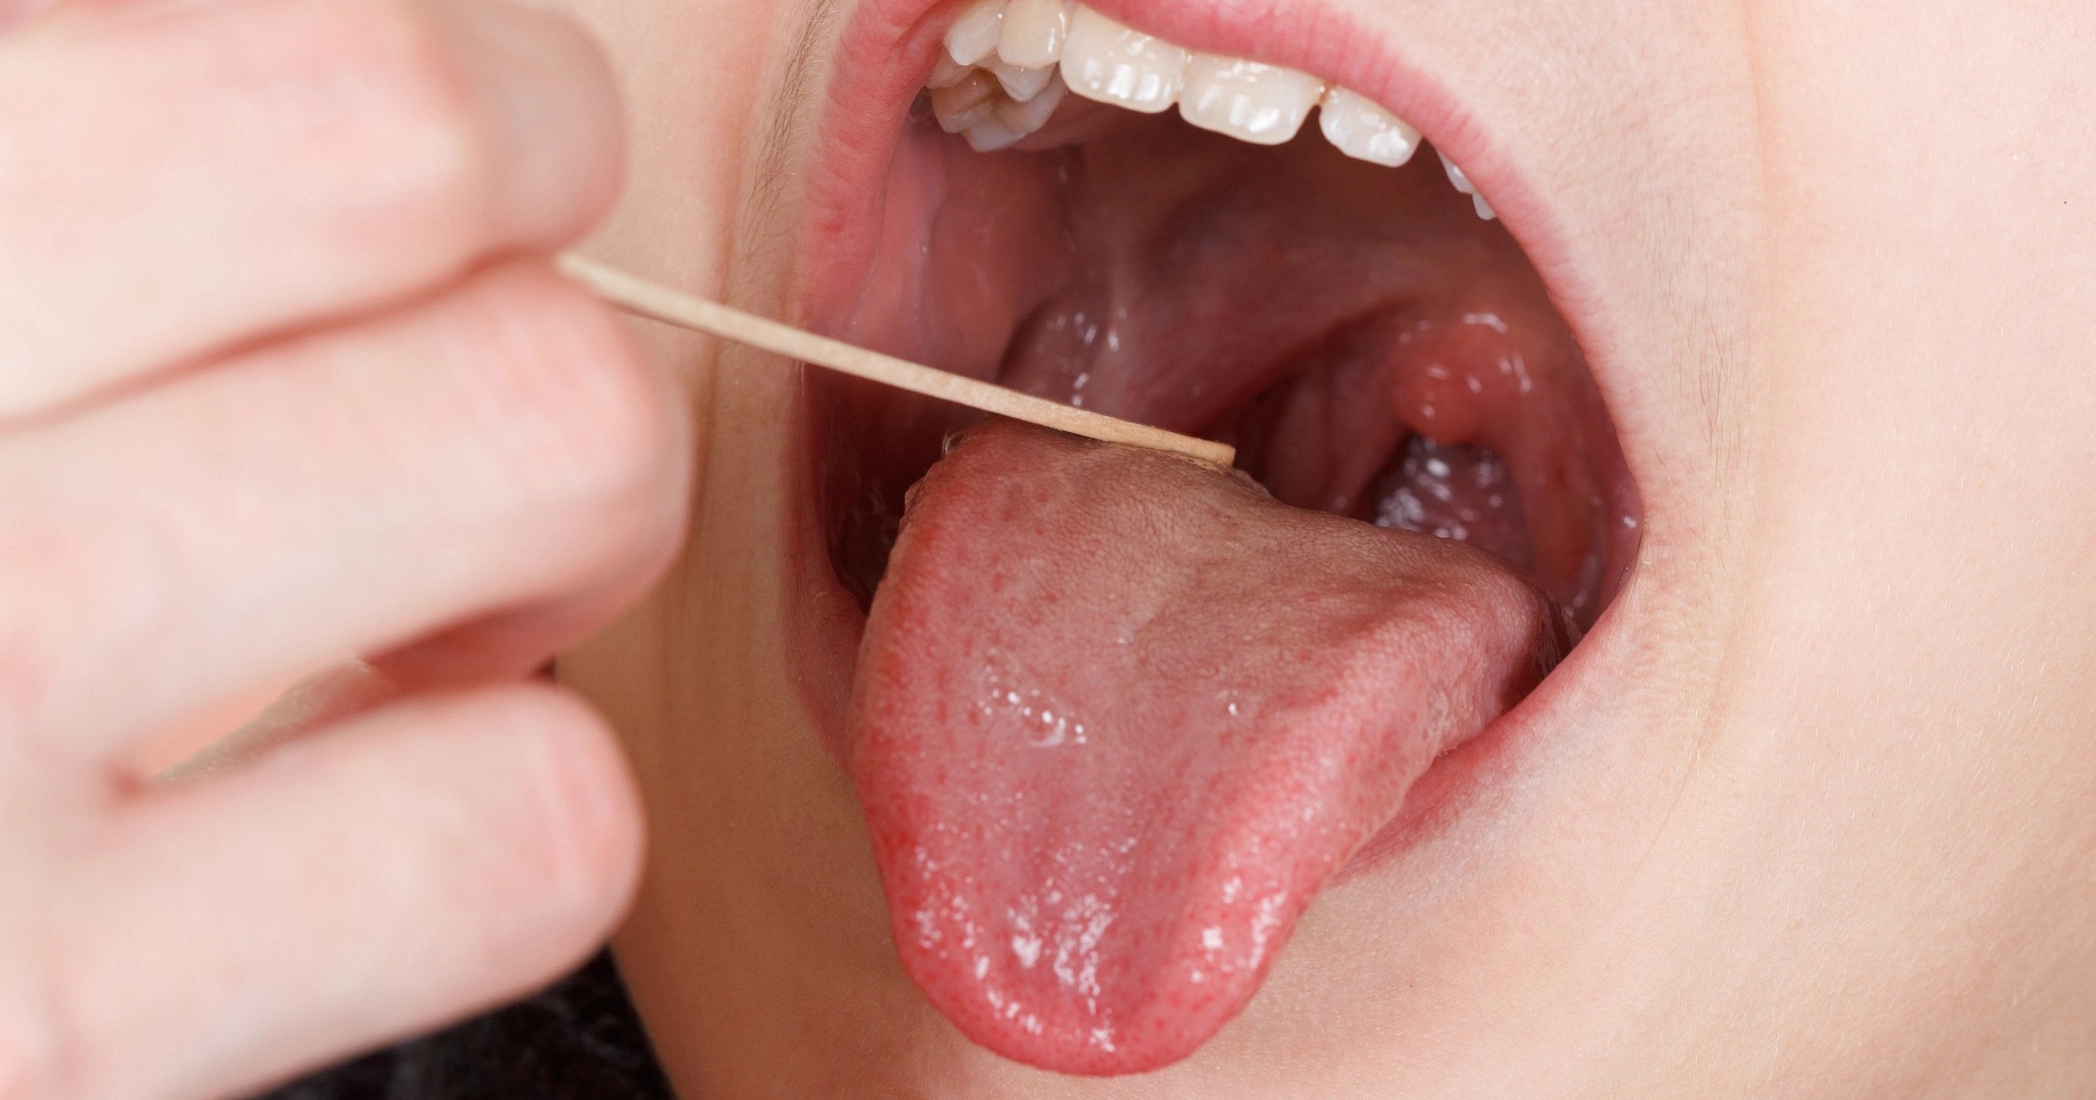 Common Symptoms of Oral Cancer to Look Out For